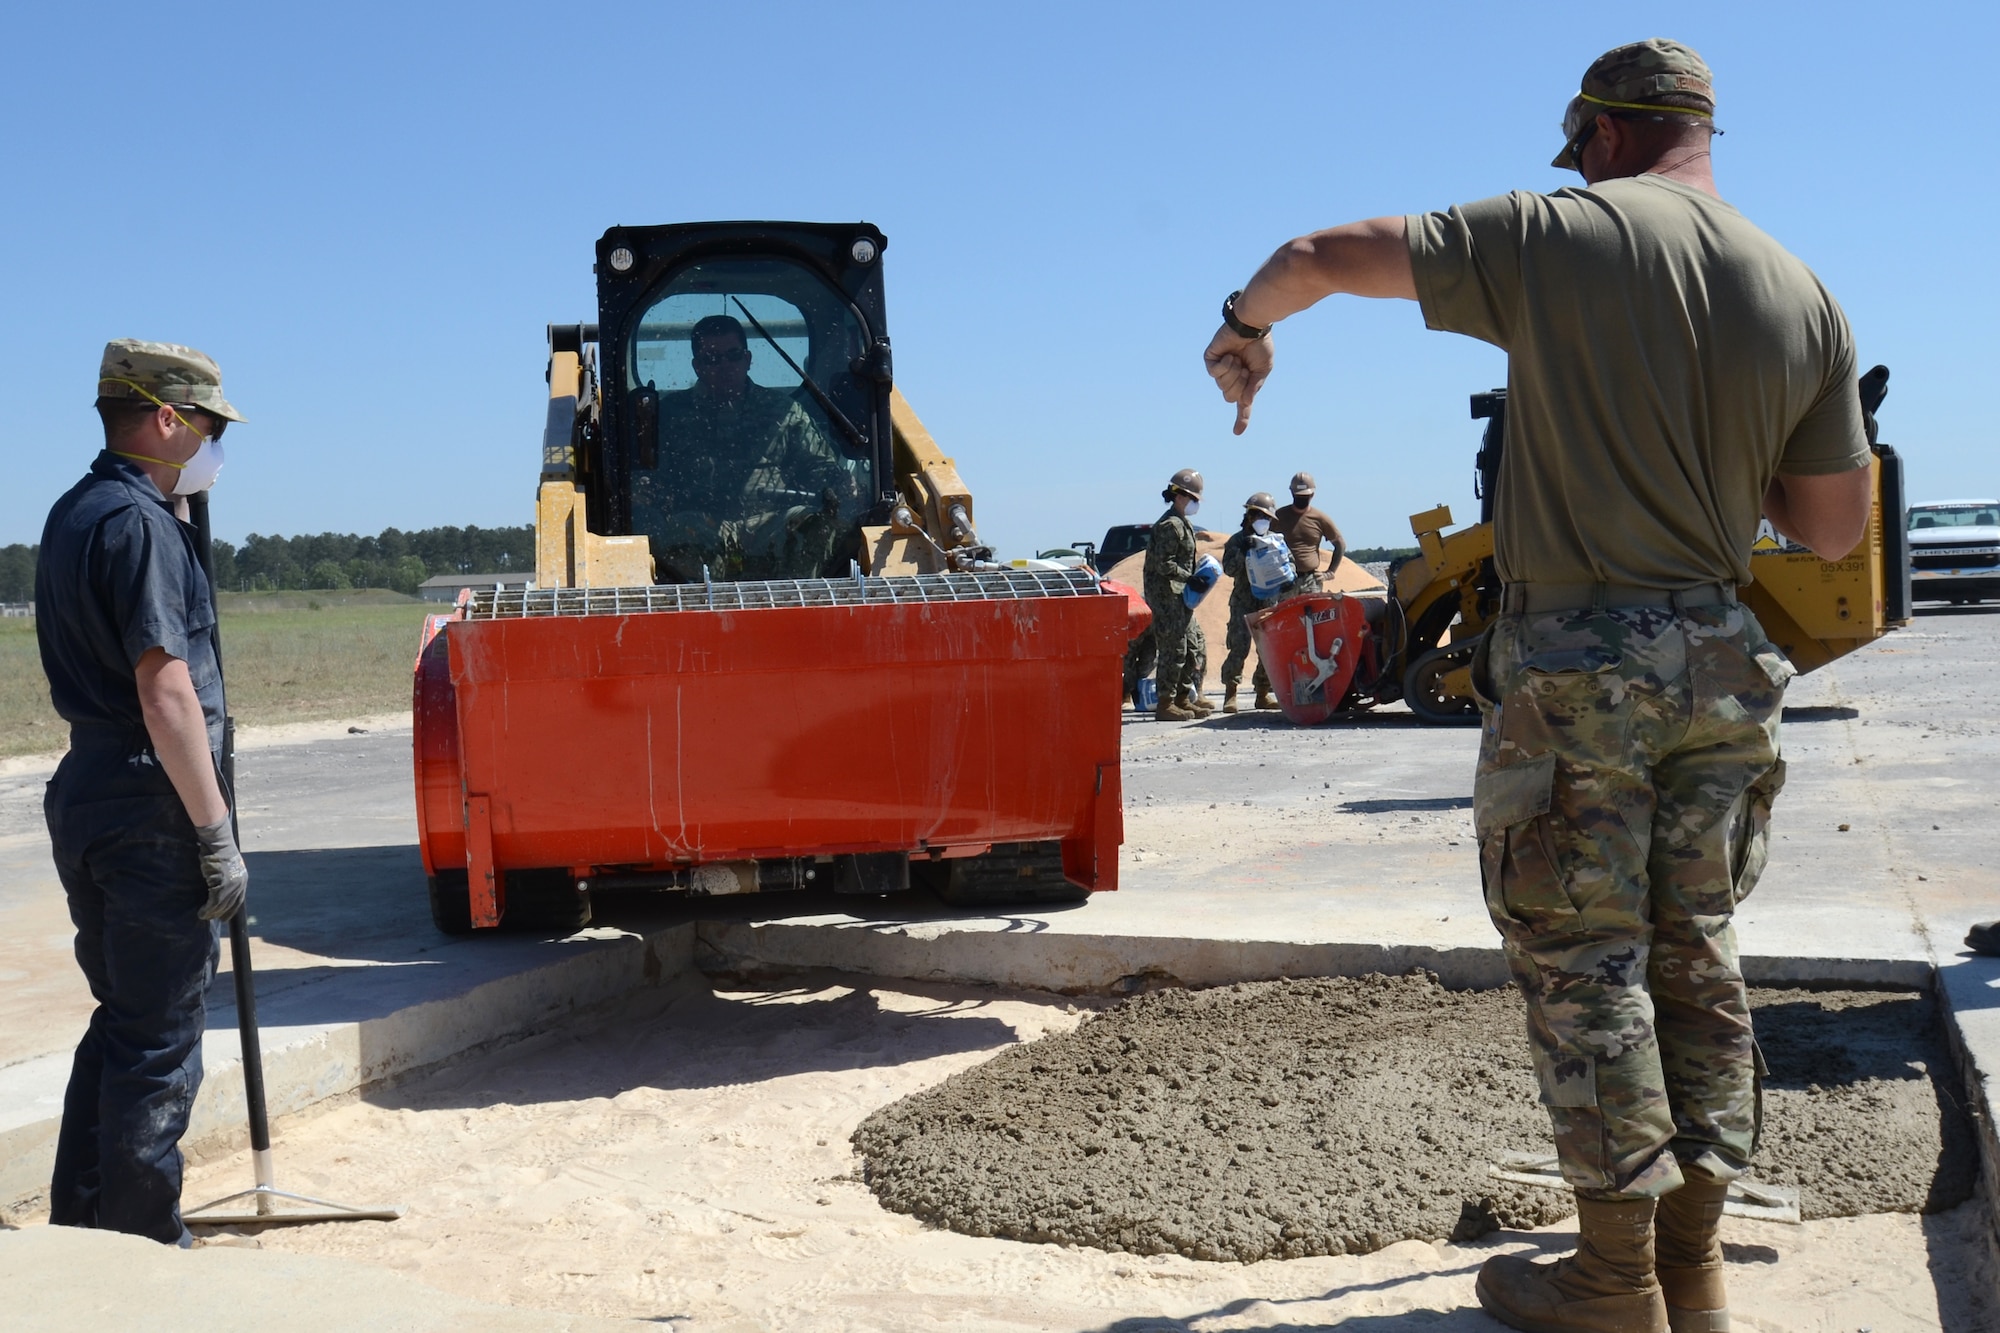 U.S. Air Force Master Sgt. Daniel Jennings (right) and Senior Airman David Poynter, 169th Civil Engineer Squadron heavy equipment operators, place poured concrete into a repaired section of runway during an Expedient and Expeditionary Airfield Damage Repair (E-ADR) Joint Capability Technology Demonstration at McEntire Joint National Guard Base, South Carolina, April 22, 2021. The demonstration simulates the rapid repair of a battle damaged runway. (U.S. Air National Guard photo by Lt. Col. Jim St.Clair, 169th Fighter Wing Public Affairs)